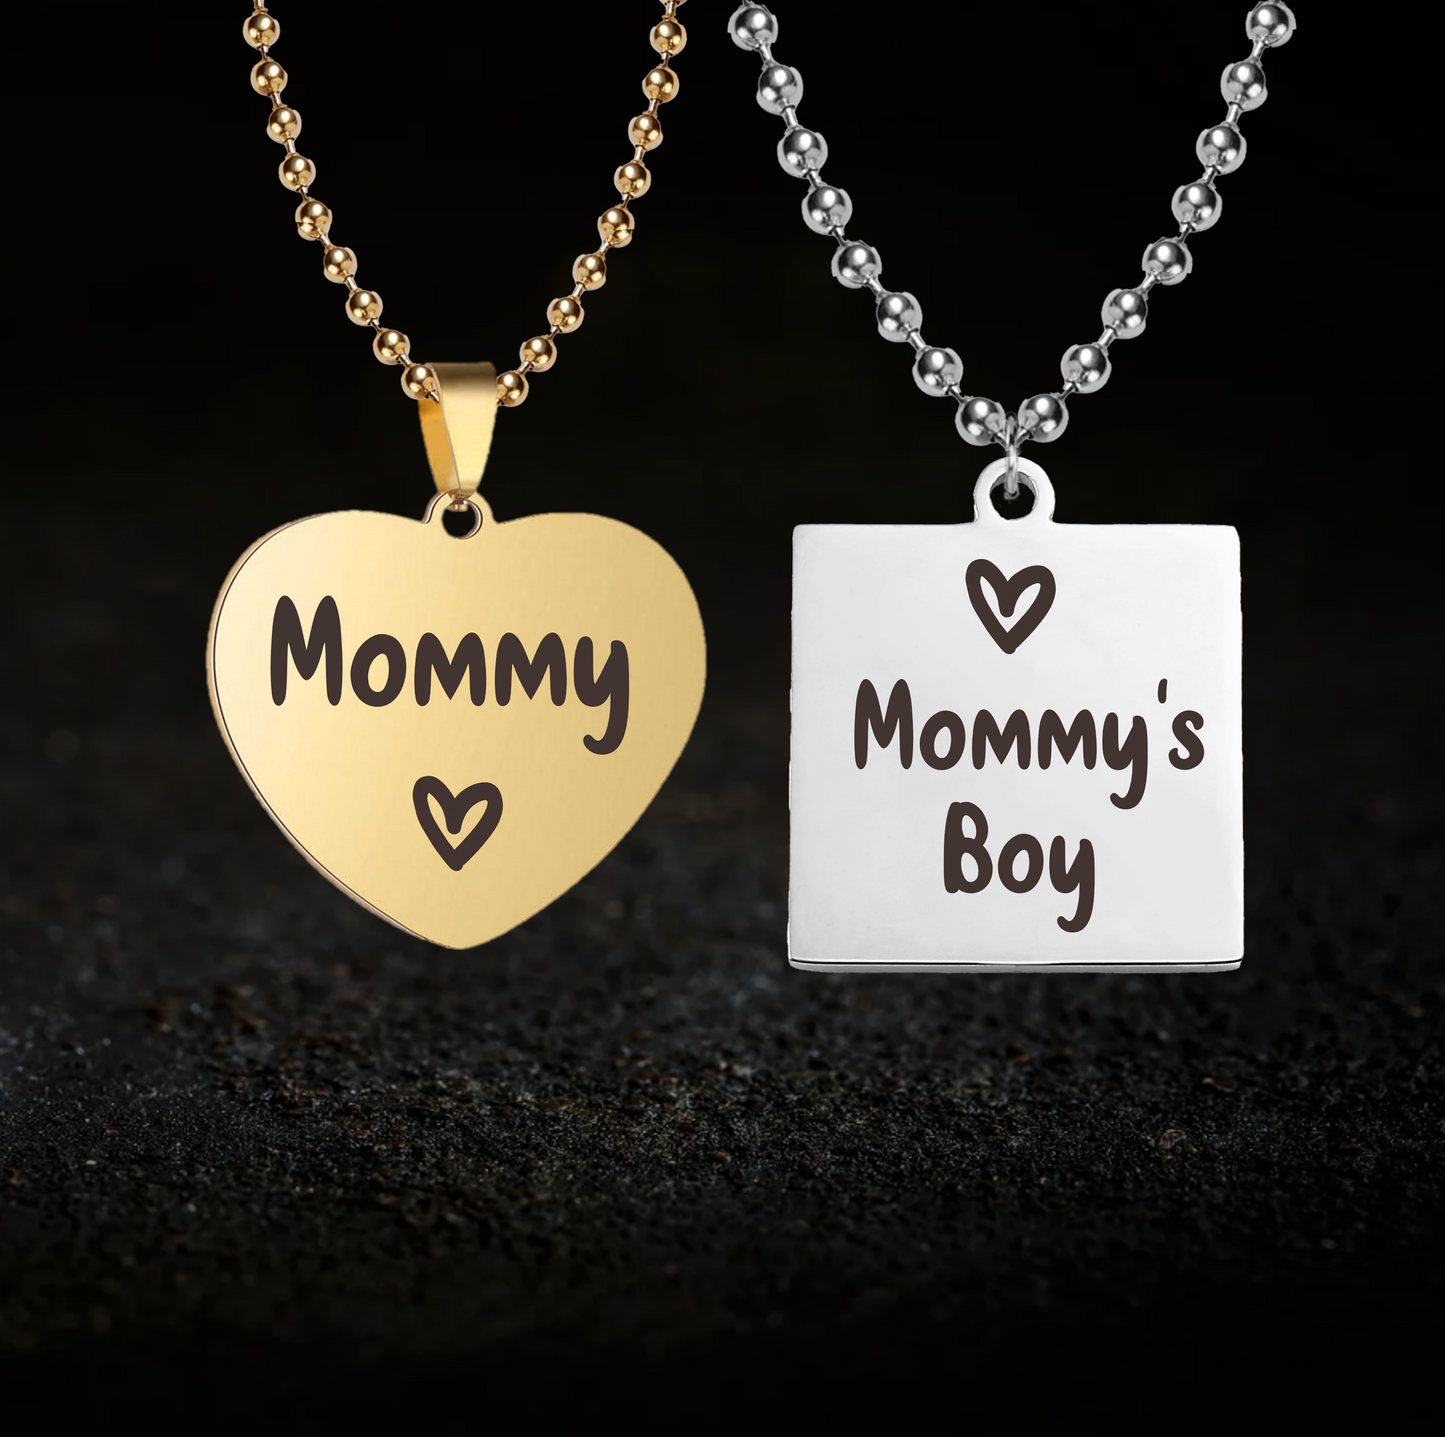 Mommy and Mommy's Boy Necklace Set